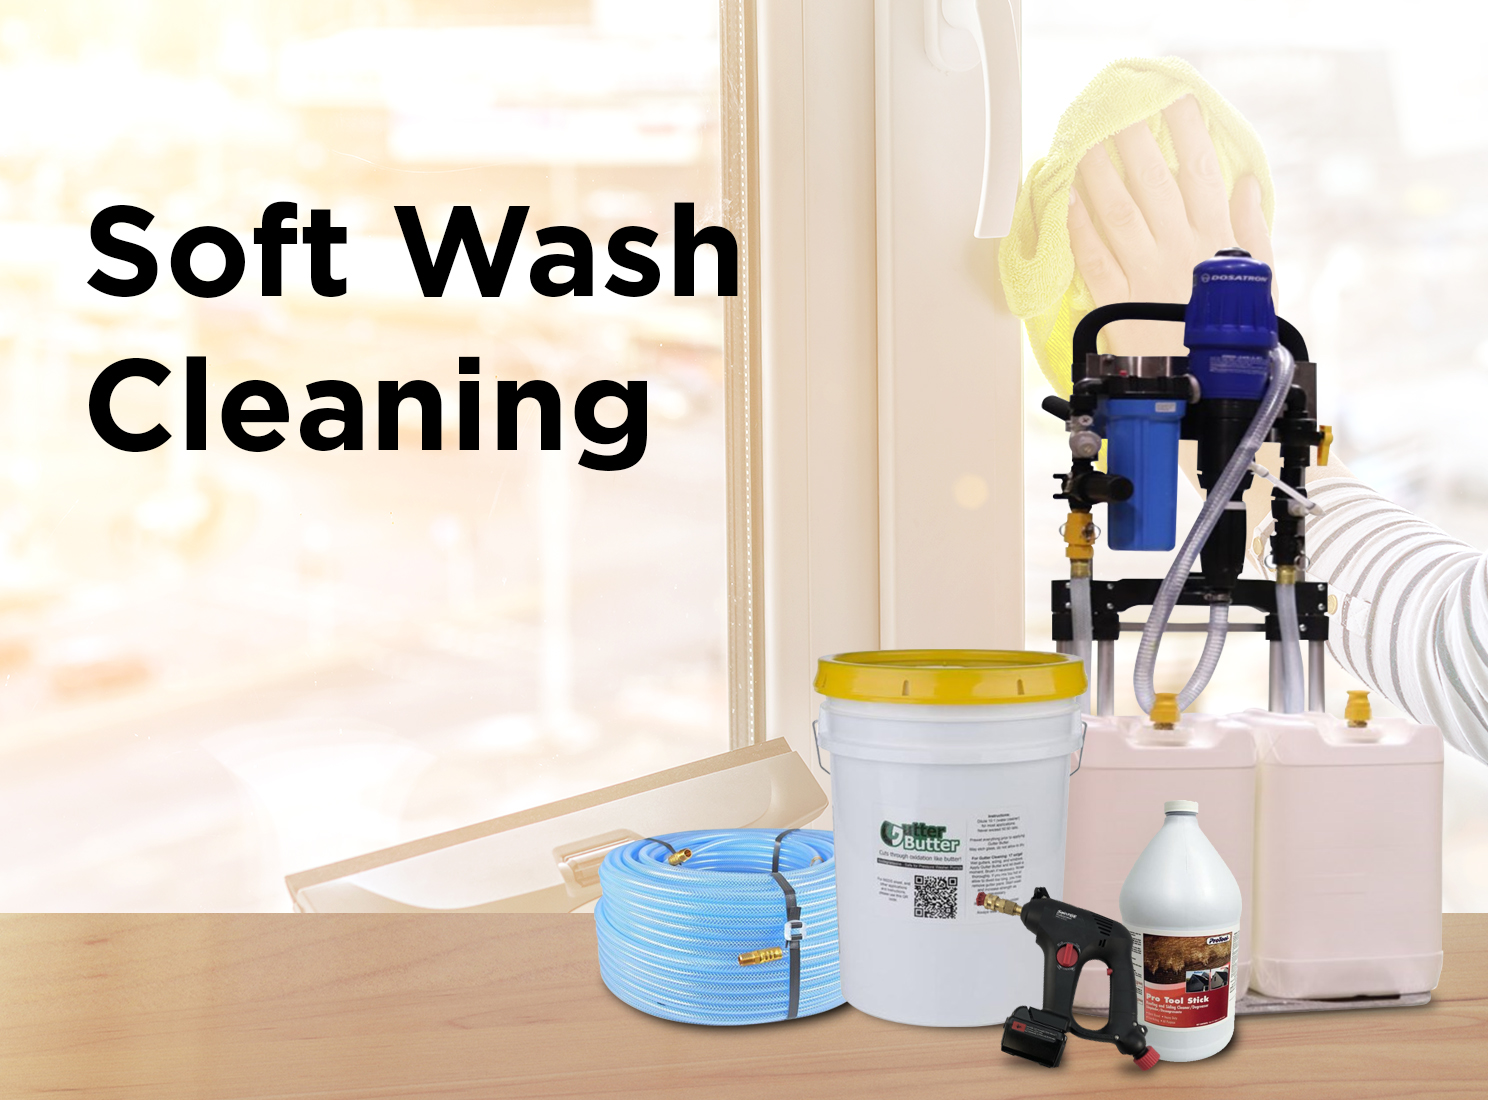 Softwash Cleaning